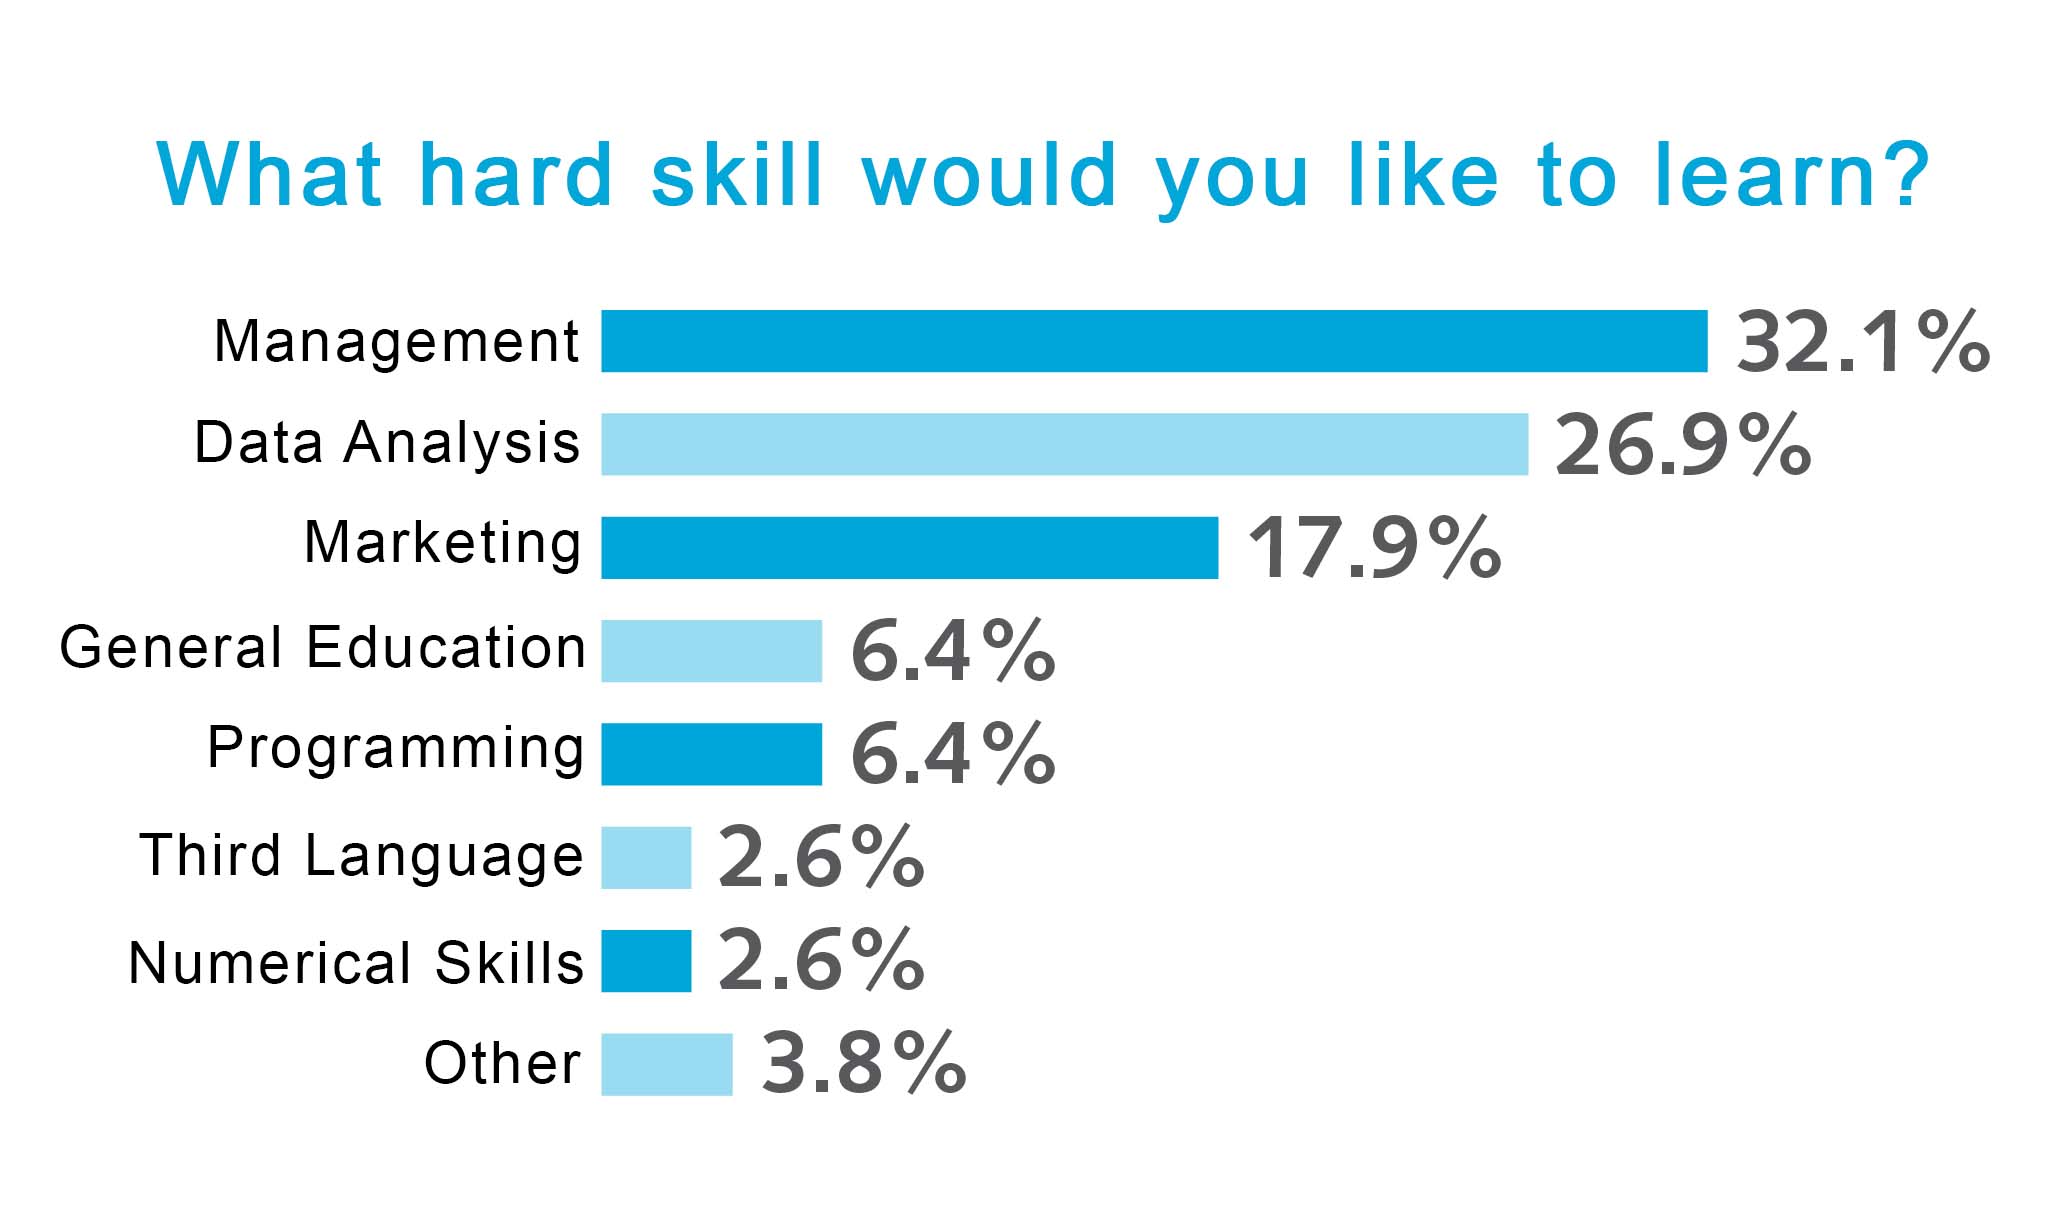 What hard skill would you like to learn?